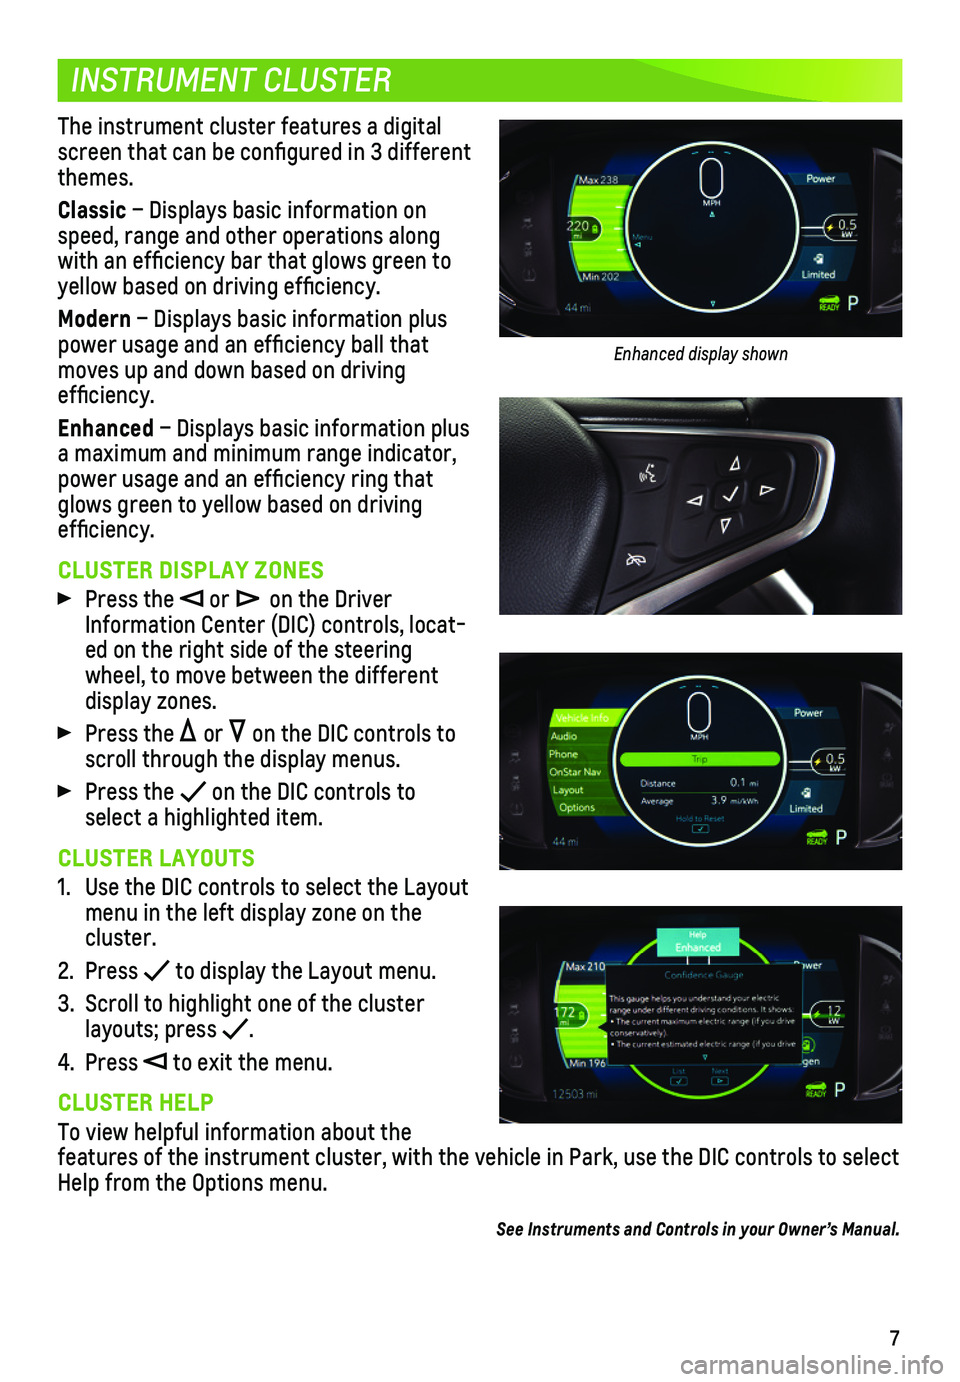 CHEVROLET BOLT EV 2018  Get To Know Guide 7
INSTRUMENT CLUSTER
The instrument cluster features a digital screen that can be configured in 3 different themes.
Classic – Displays basic information on speed, range and other operations along wi